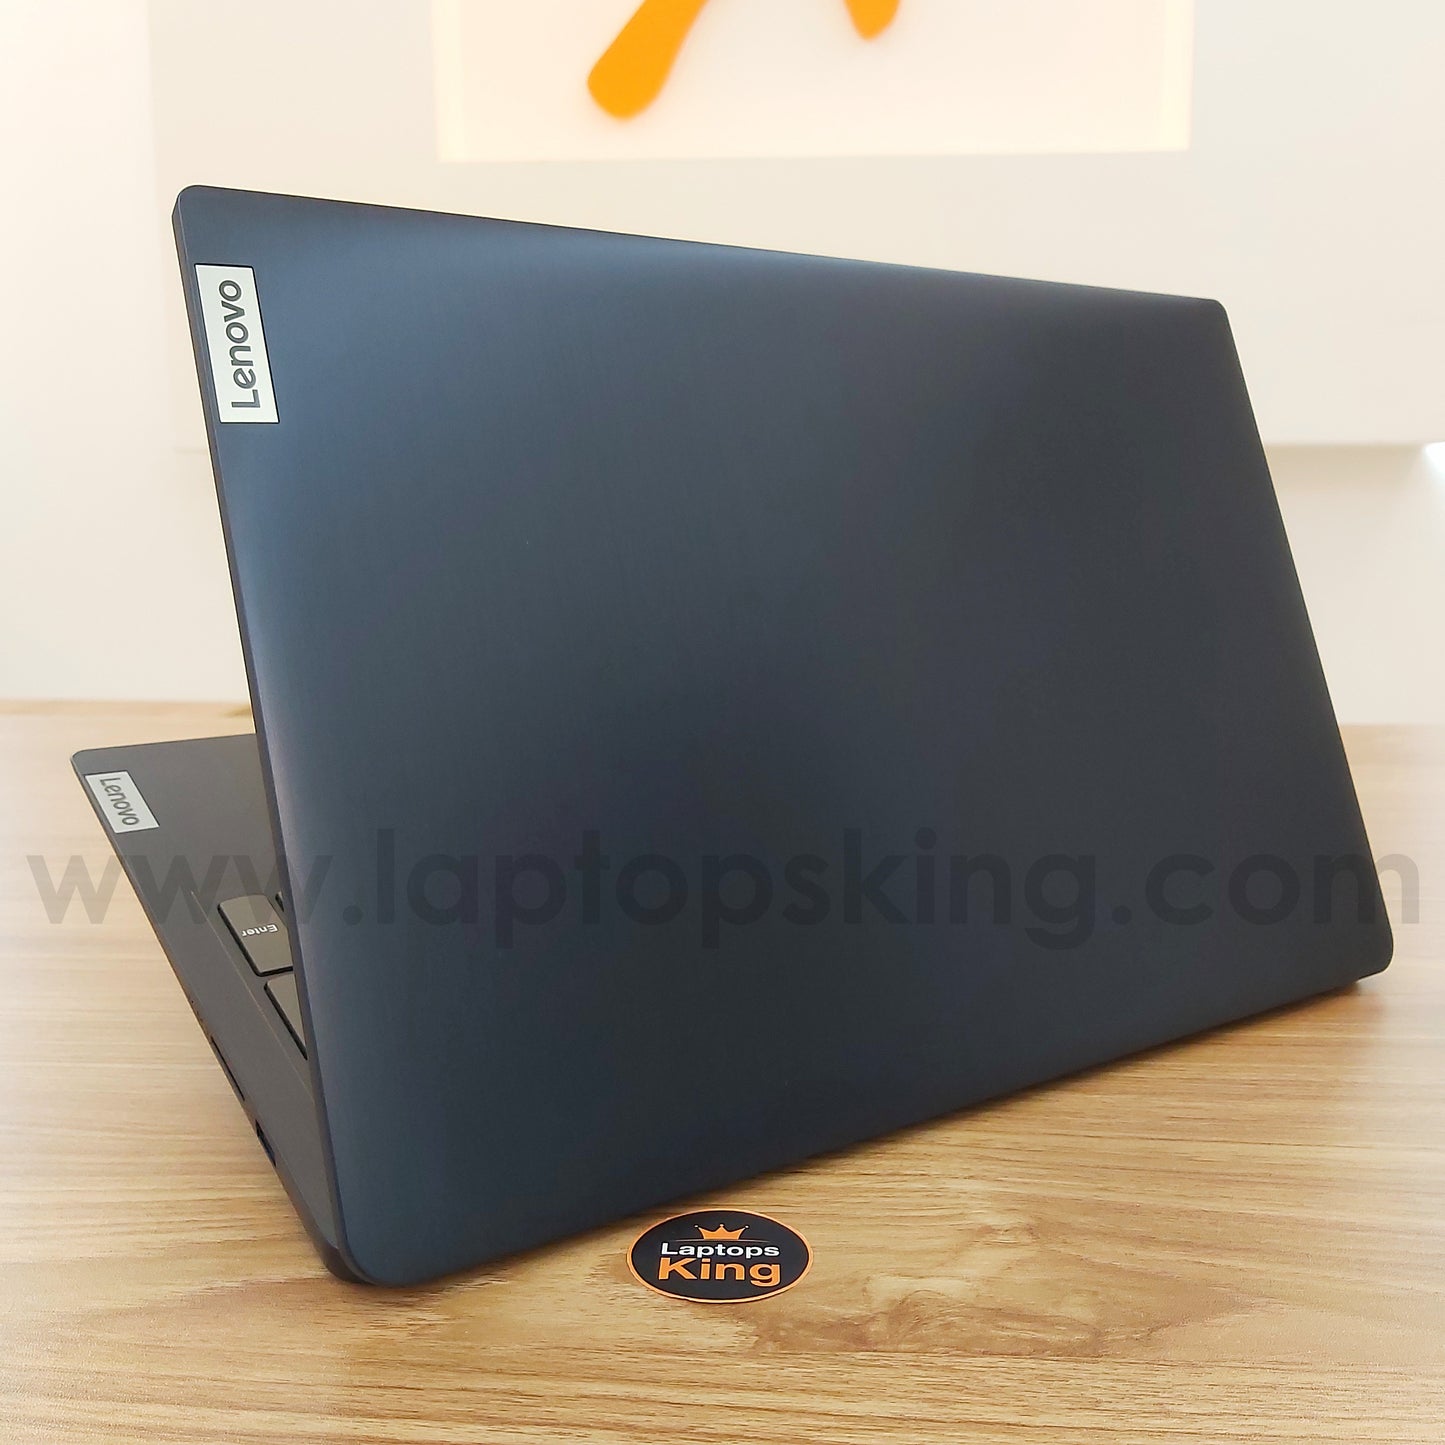 Lenovo Ideapad 3 82h8 / 15itl6  i7-1165g7 Mx450 Laptop Offers (Brand New) Computer for sale Lebanon, laptop in Lebanon, laptop for sale Lebanon, best programming laptop, laptop for sale in Lebanon, laptops for sale in Lebanon, laptop for sale in Lebanon, buy computer Lebanon, buy laptop Lebanon.